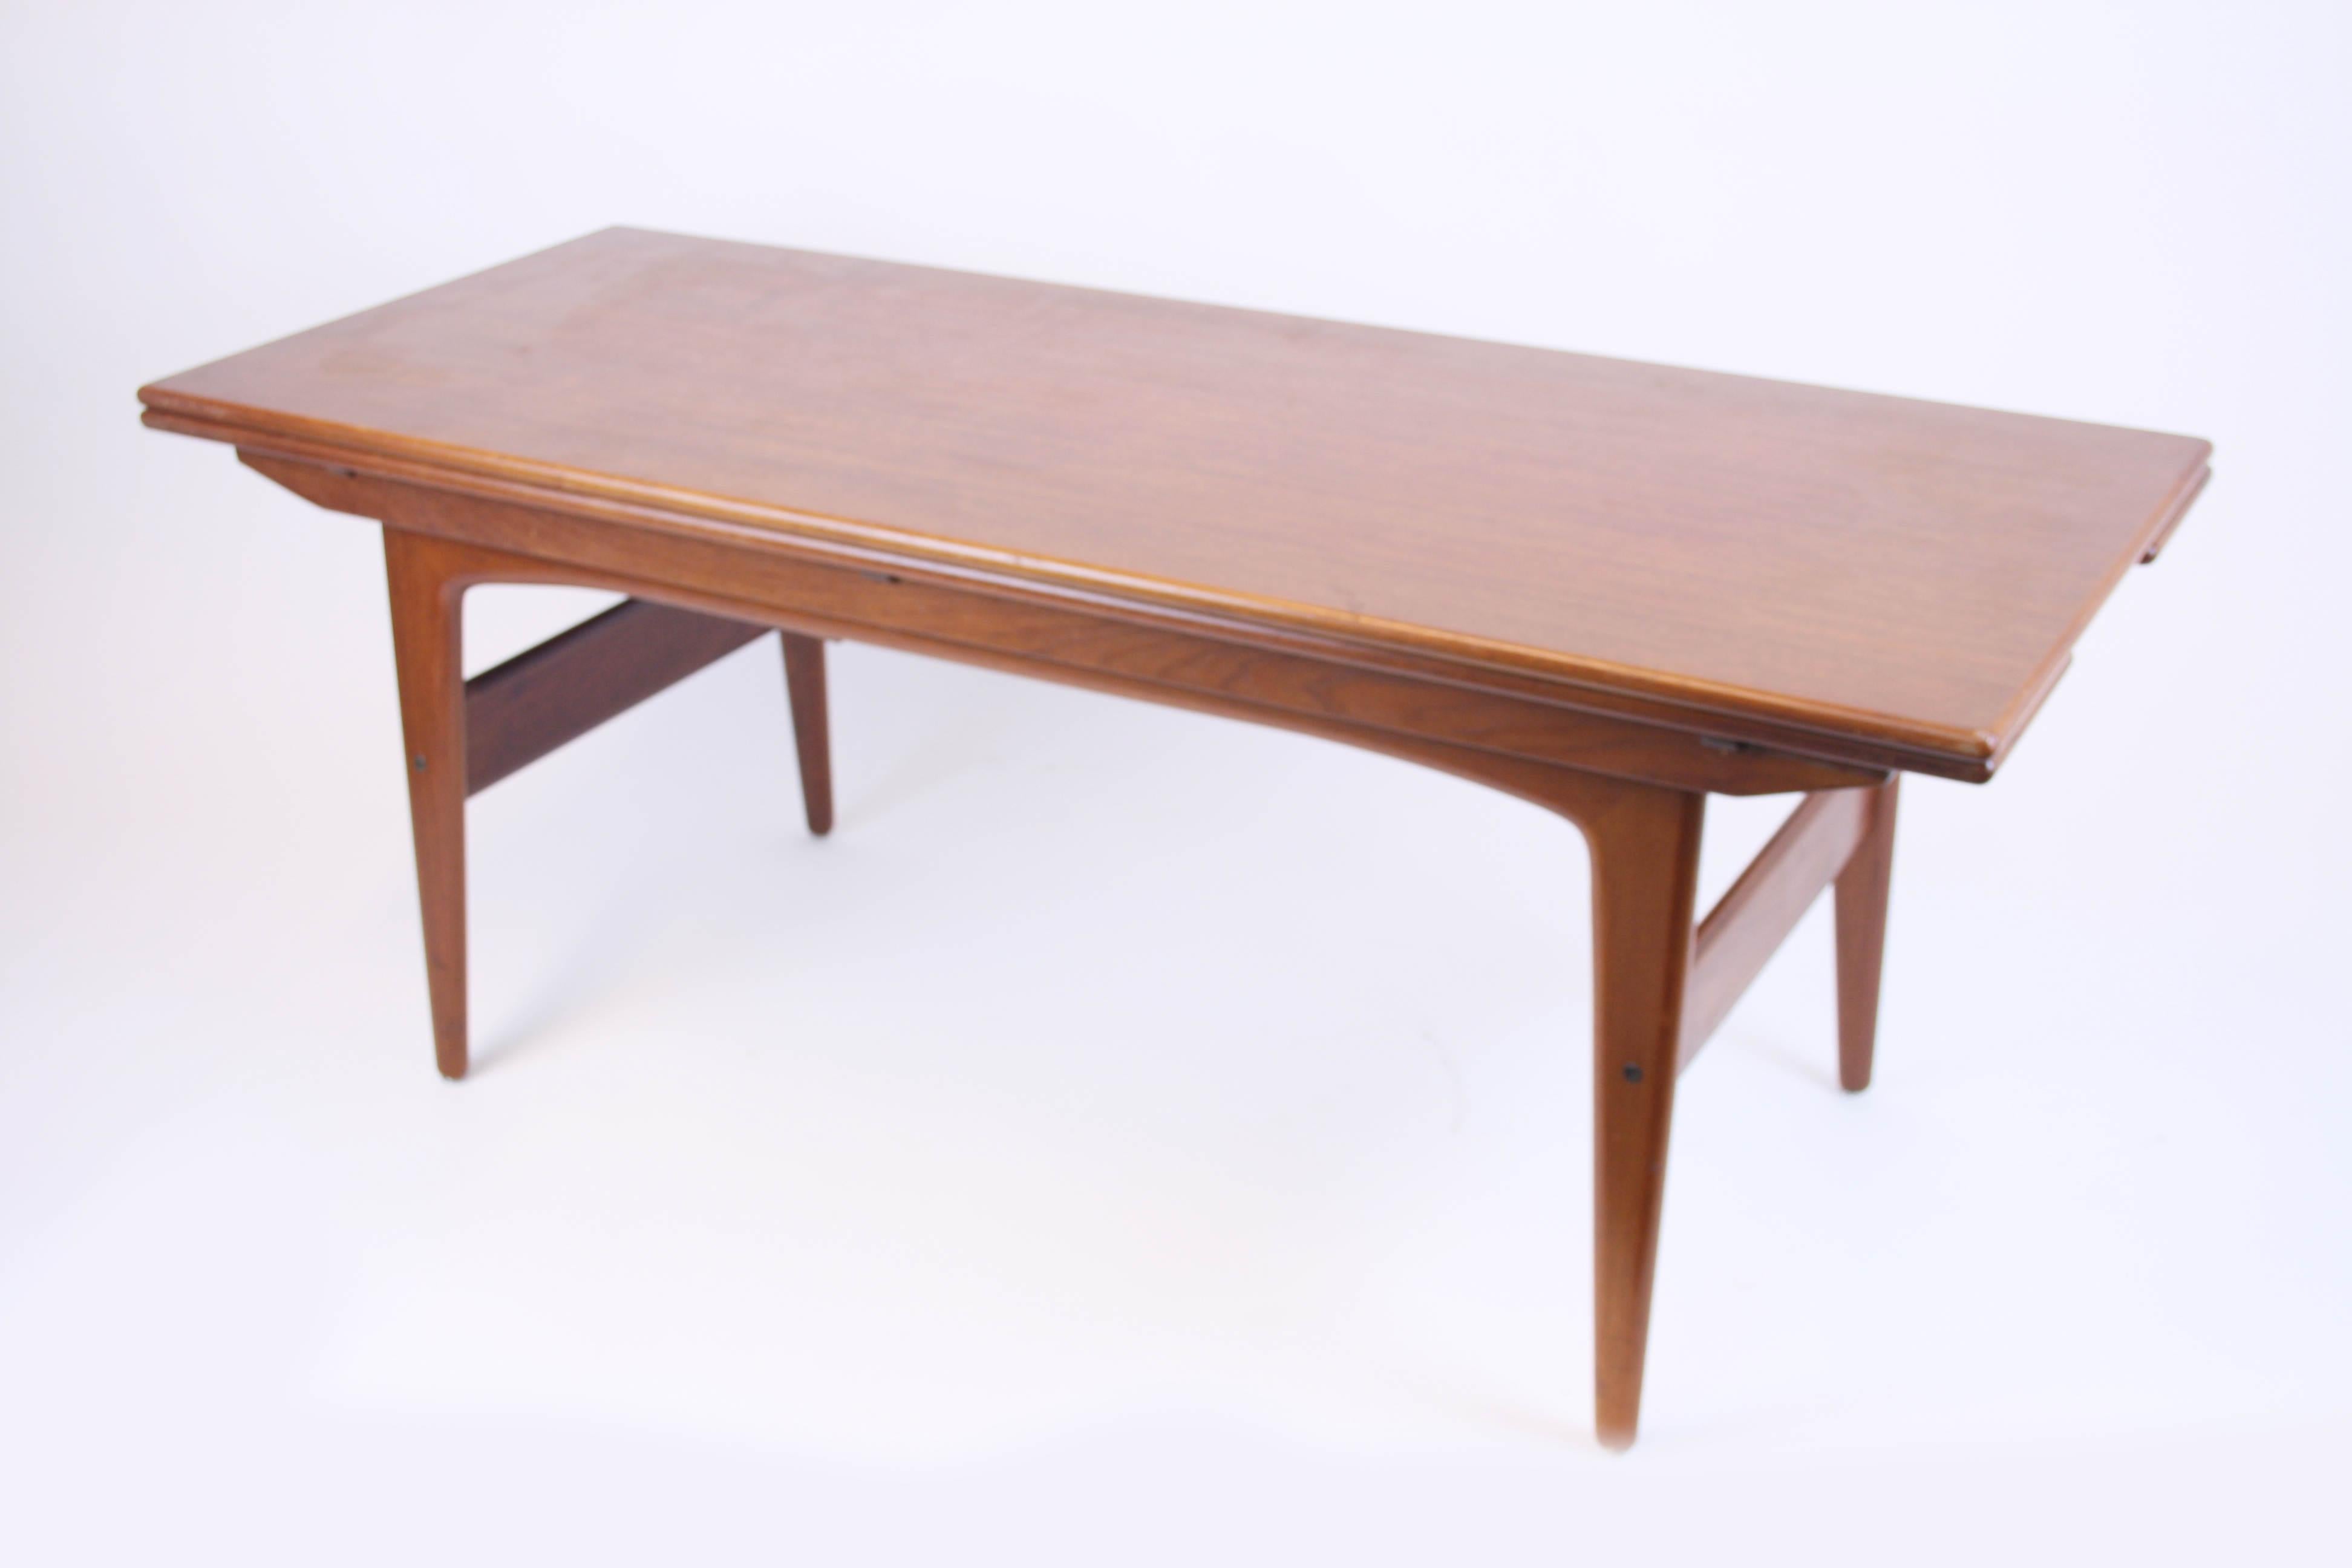 Mid-Century Modern side table or sofa table by Trioh Denmark, manufactured of solid teak wood. This object offers two applications it can easily be transformed into a dining table by lifting and expanding the integrated sidepanels. As a dining table